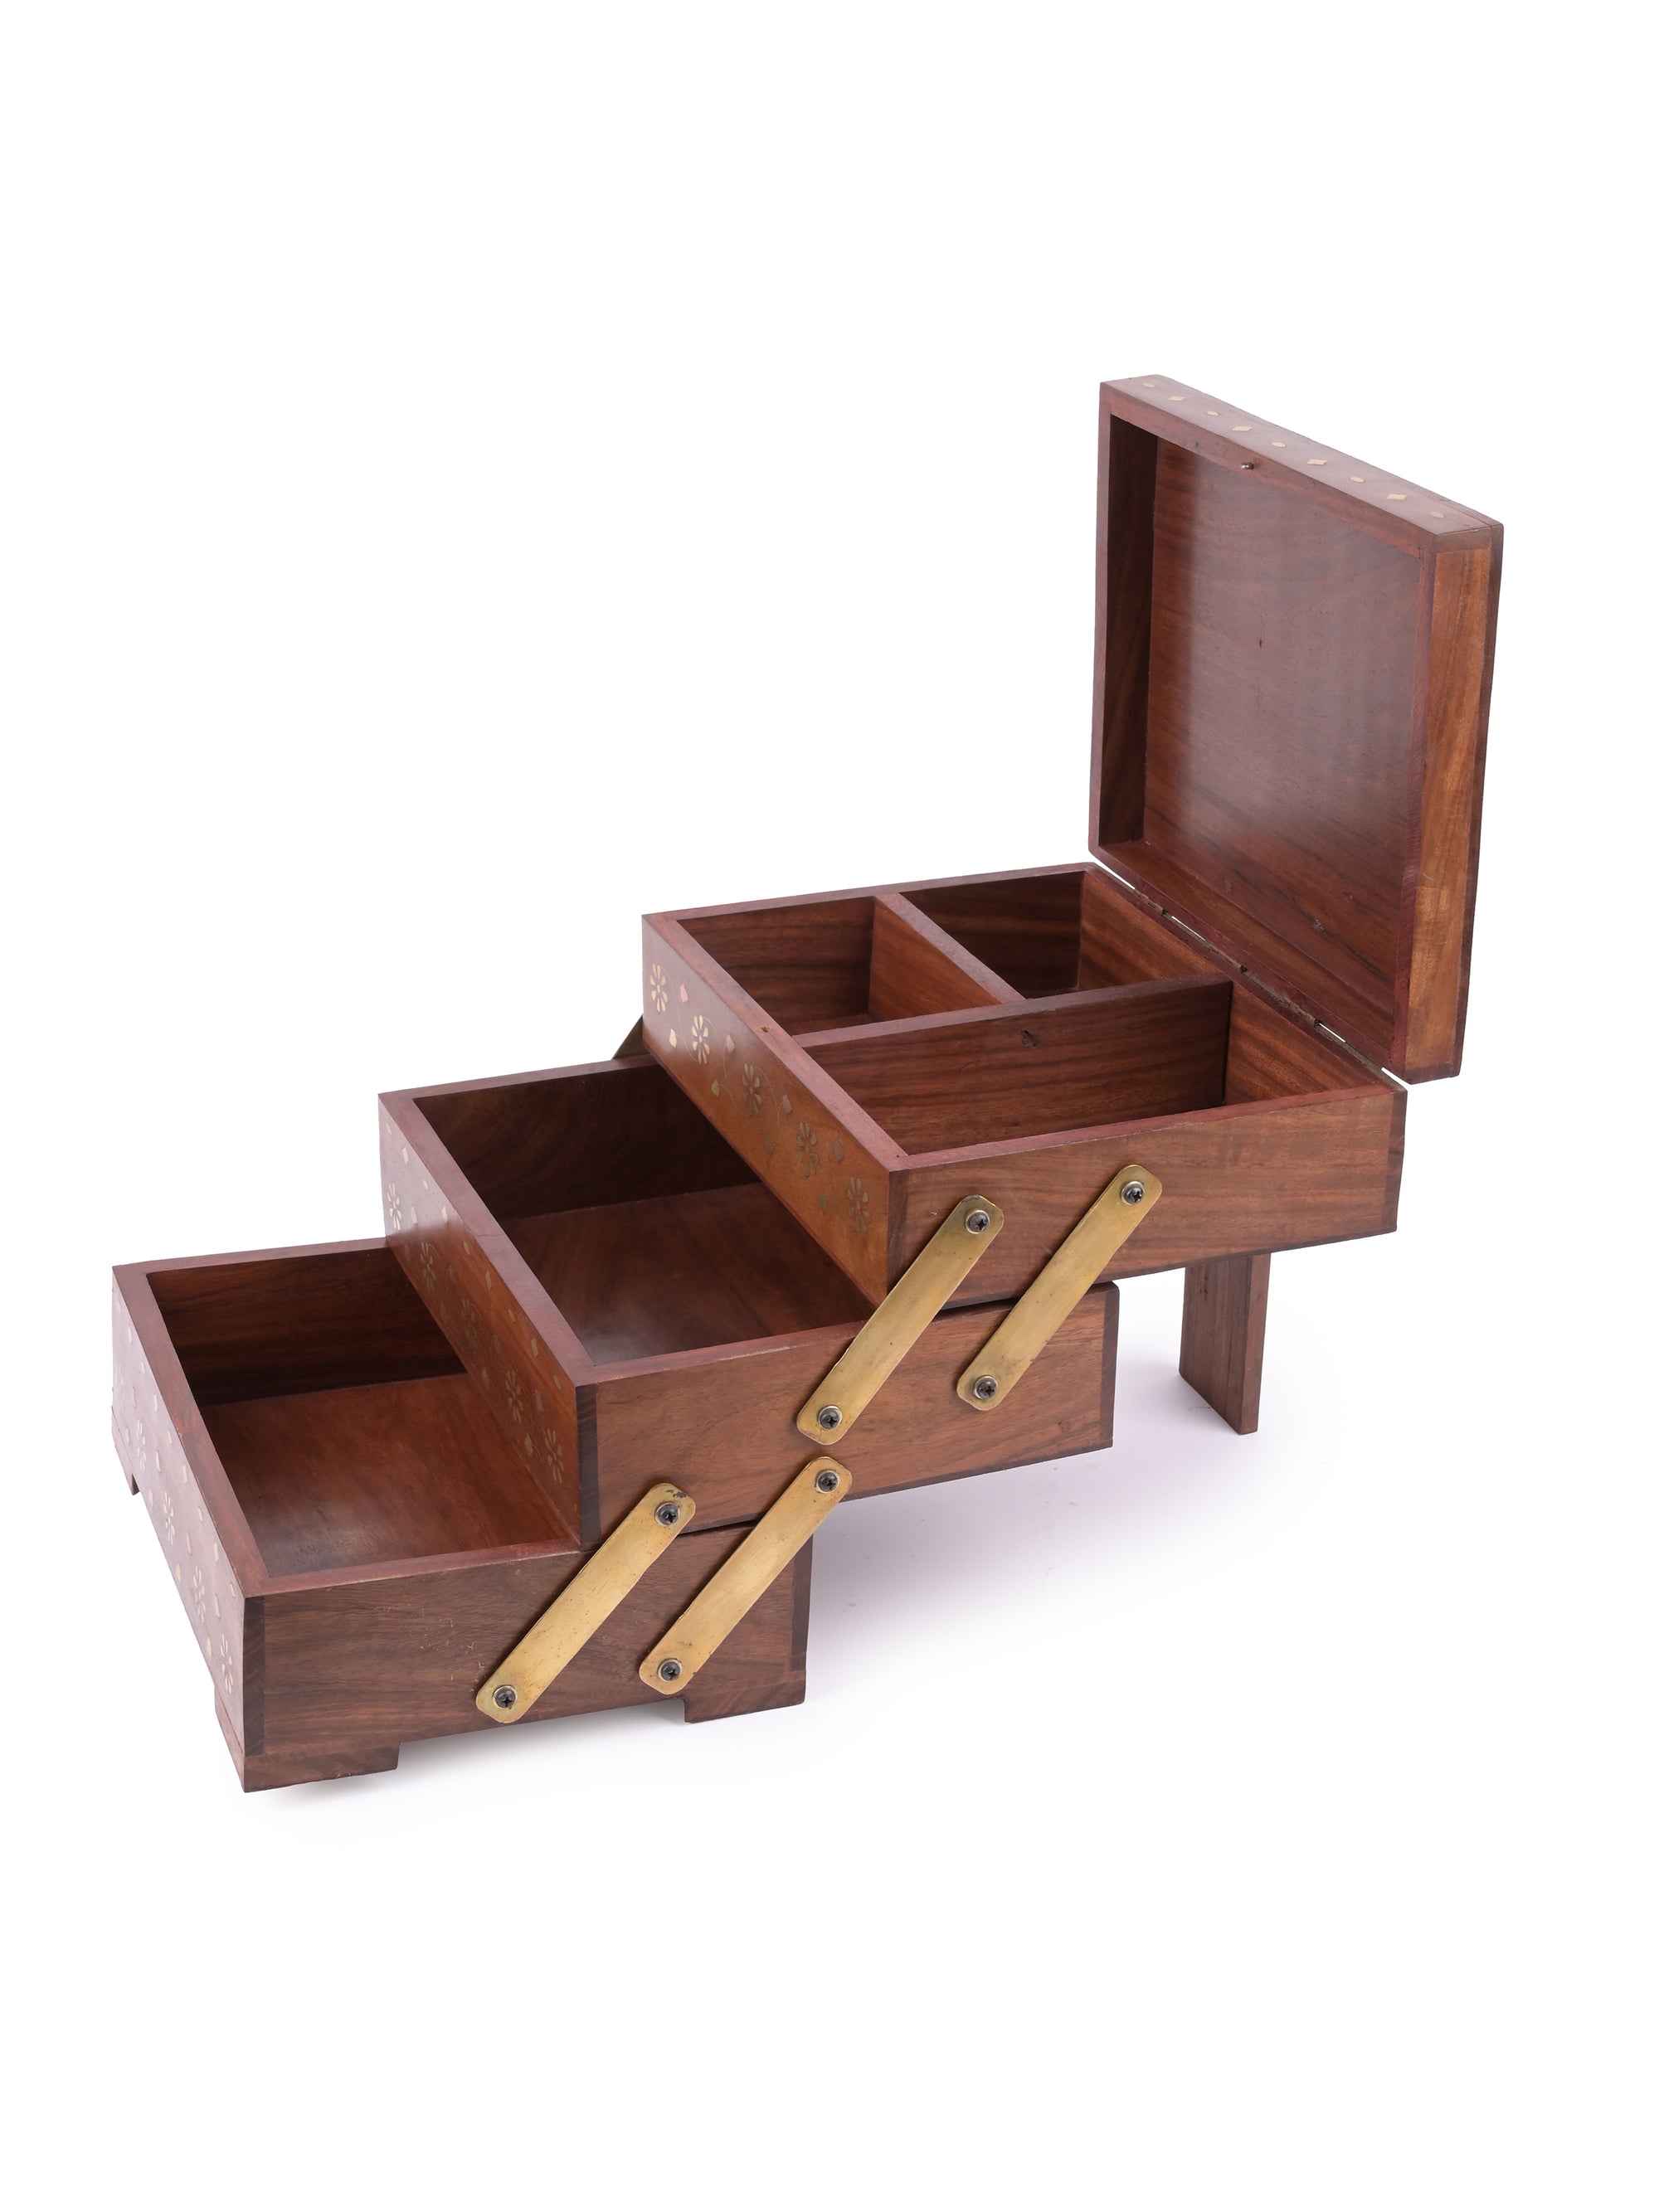 Wood crafted 3 step Storage box for multiple use - The Heritage Artifacts